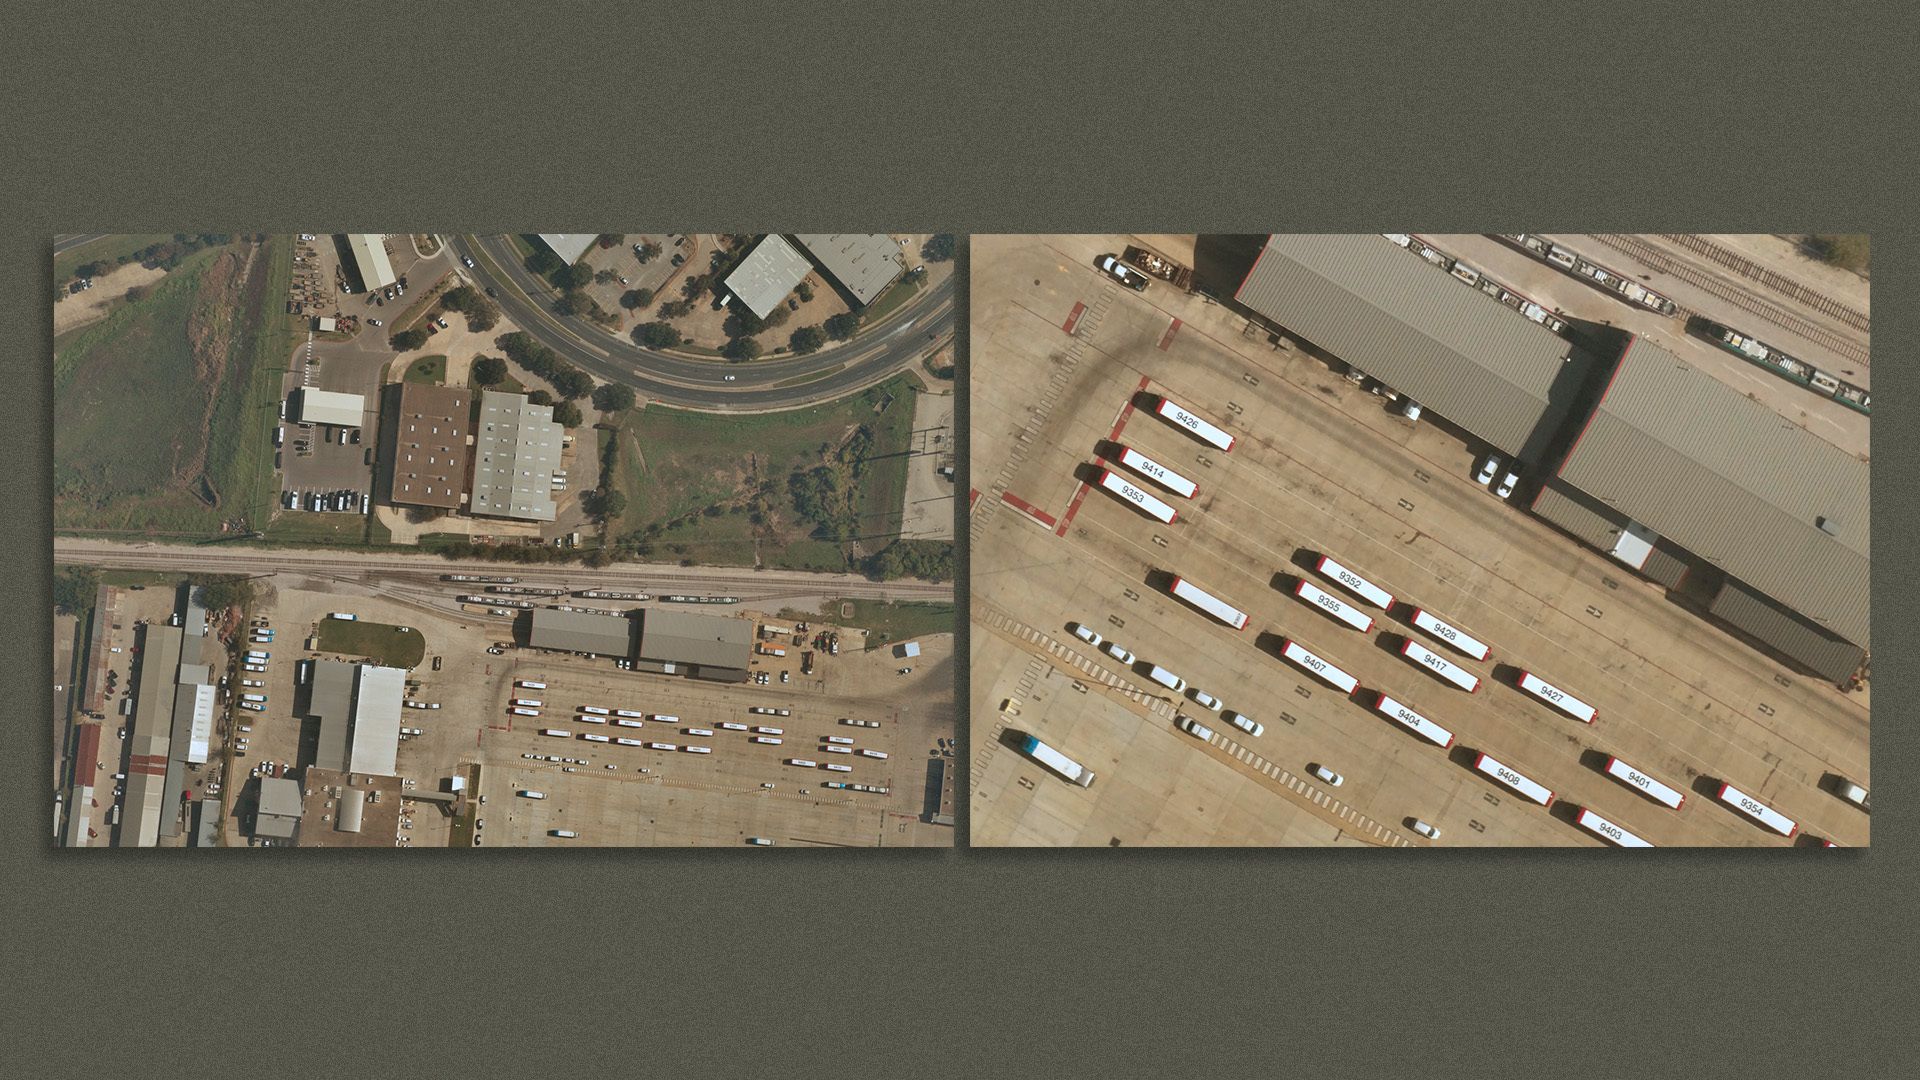 Image comparison of the same bus station in 30cm resolution (left) and 10cm resolution (right). 